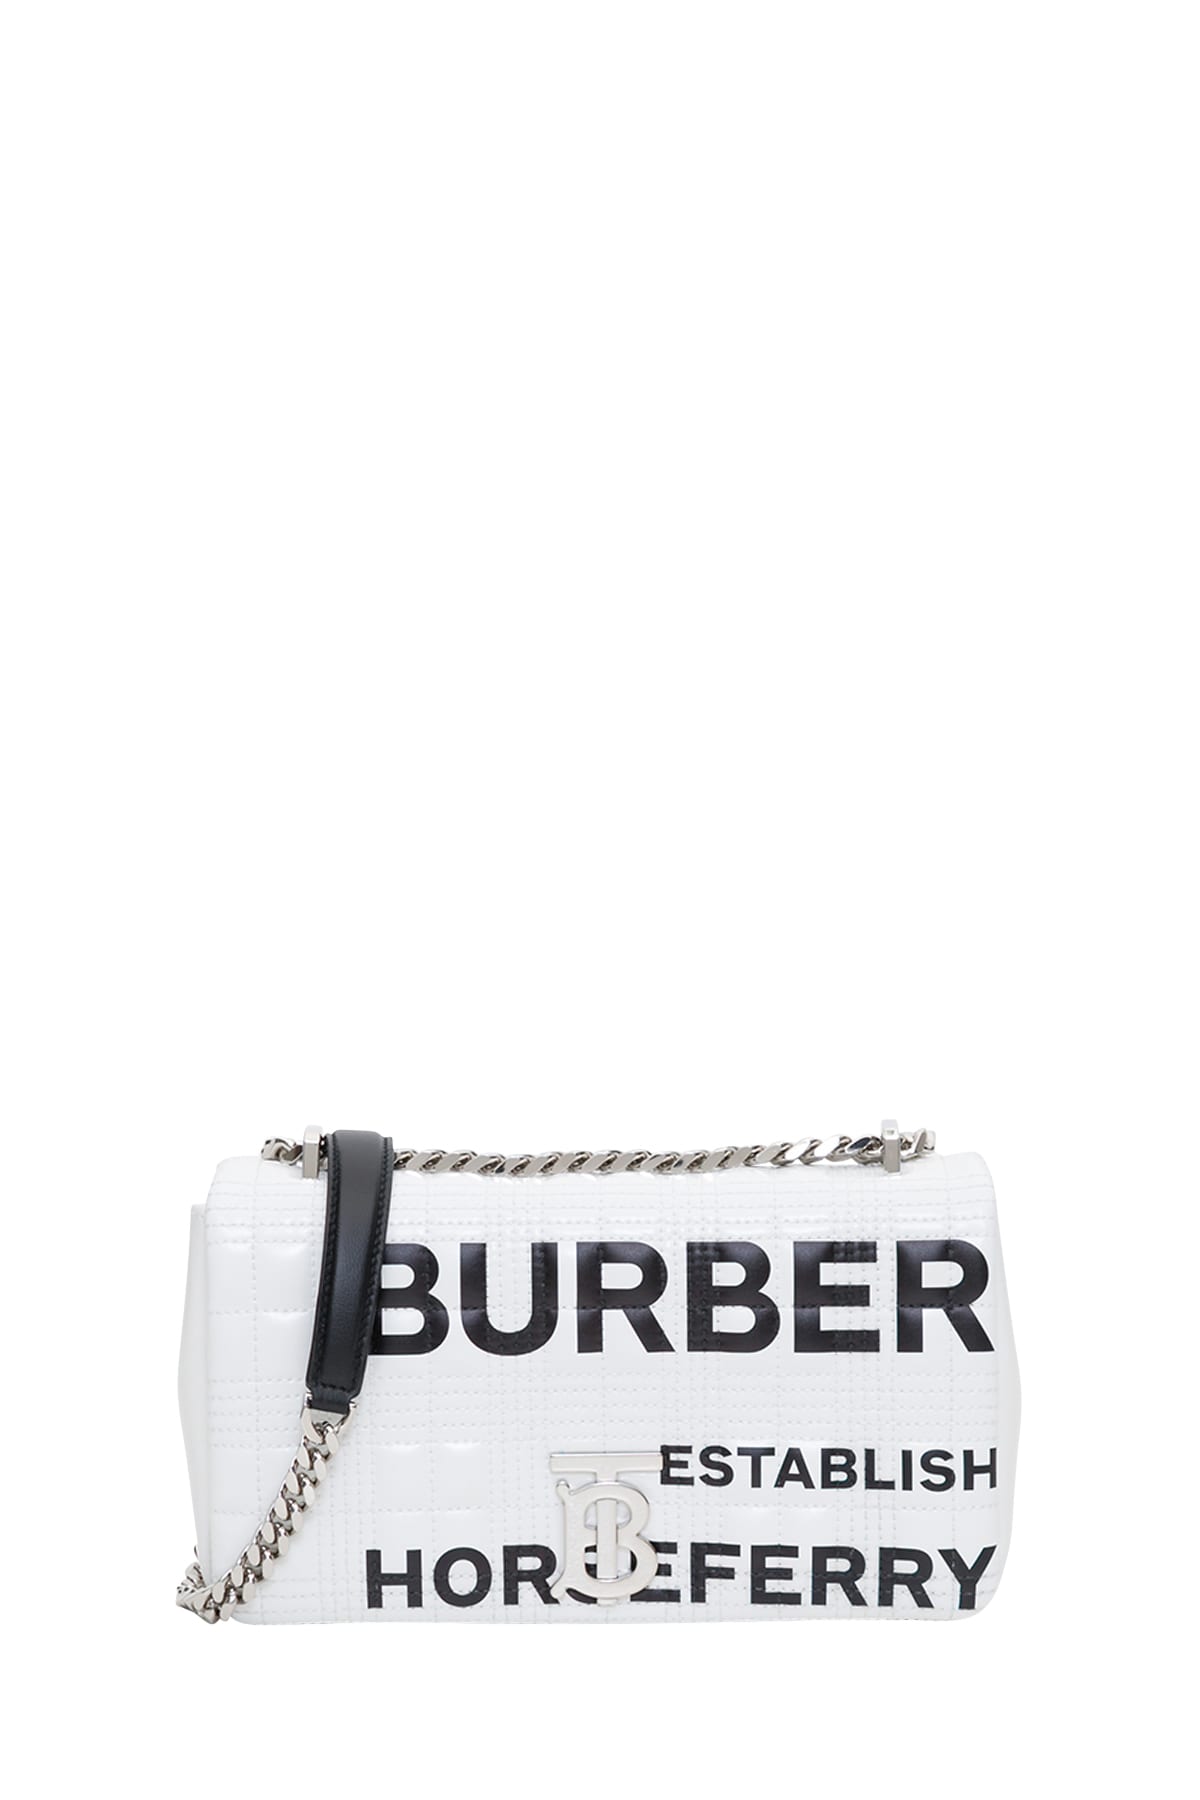 BURBERRY LOLA SMALL SHOULDER BAG WITH HORSEFERRY PRINT,11332477